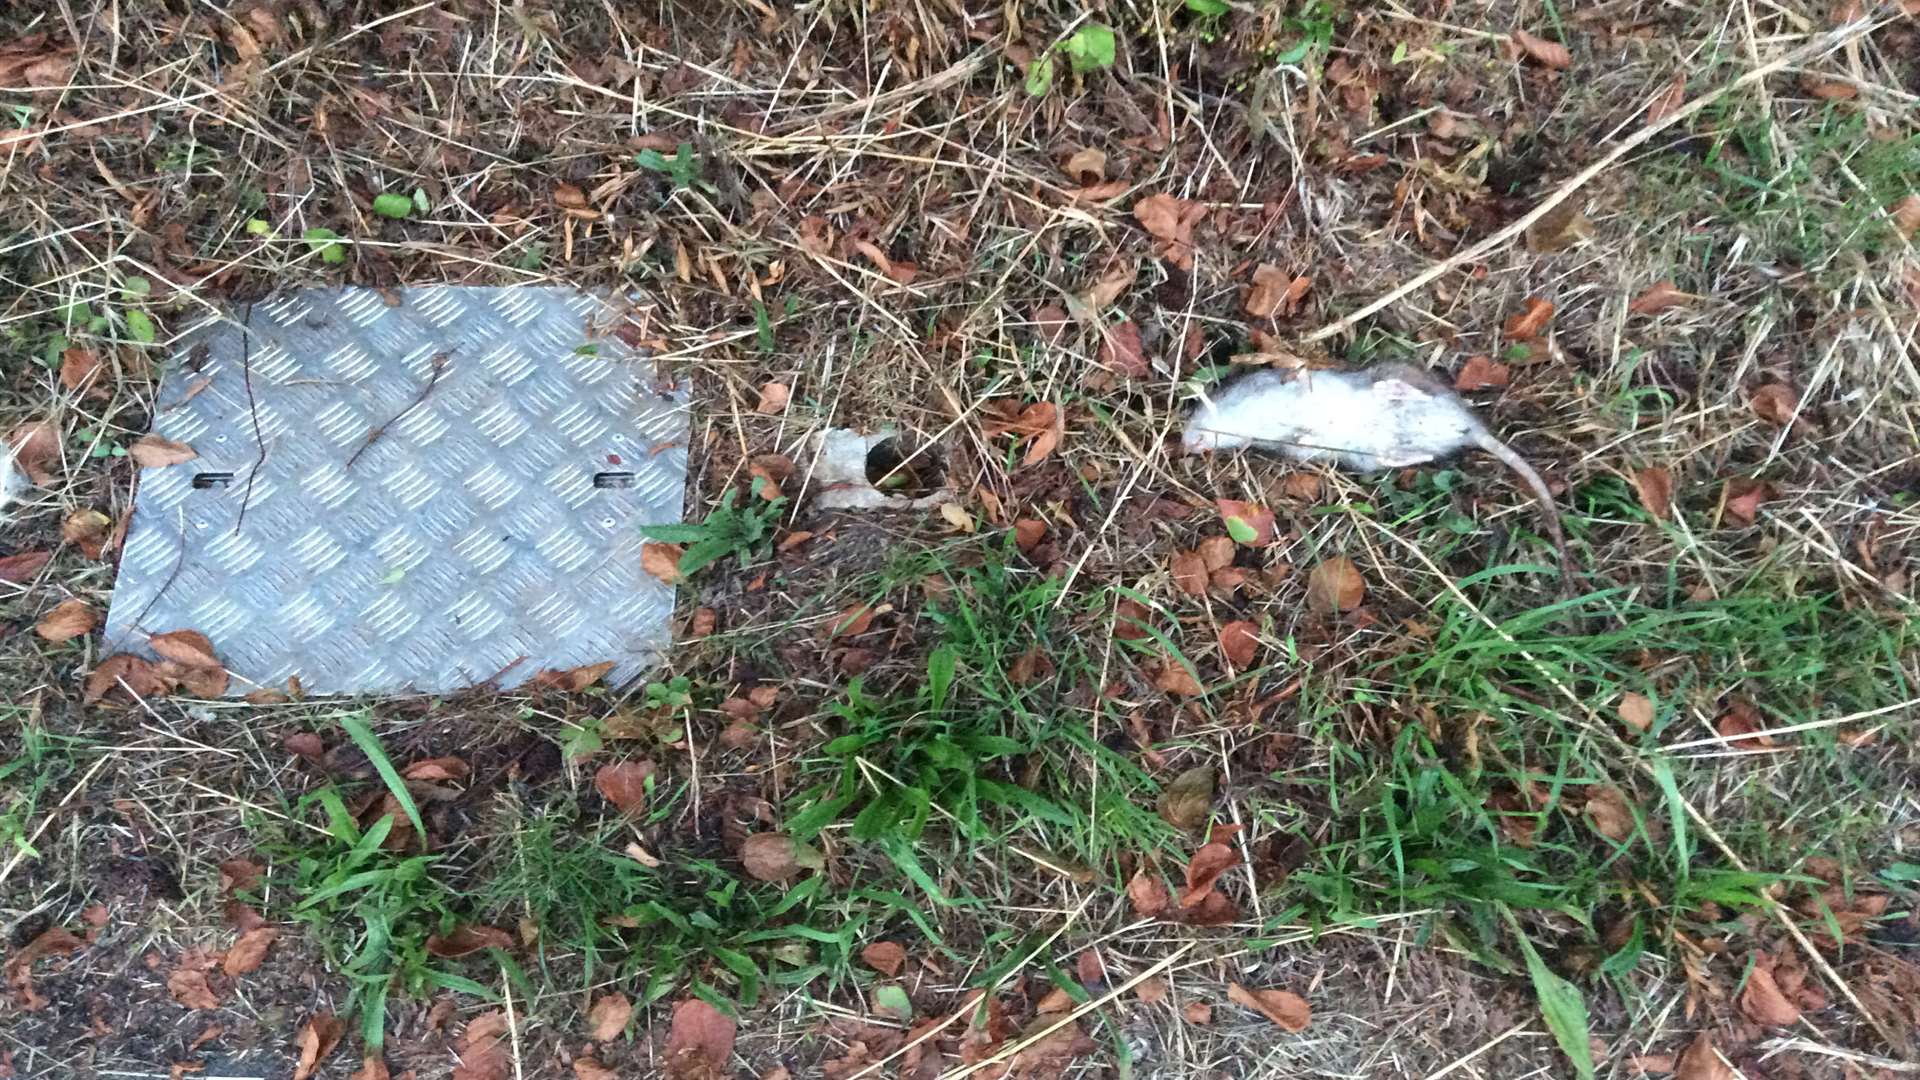 Dead rat found on the public footpath